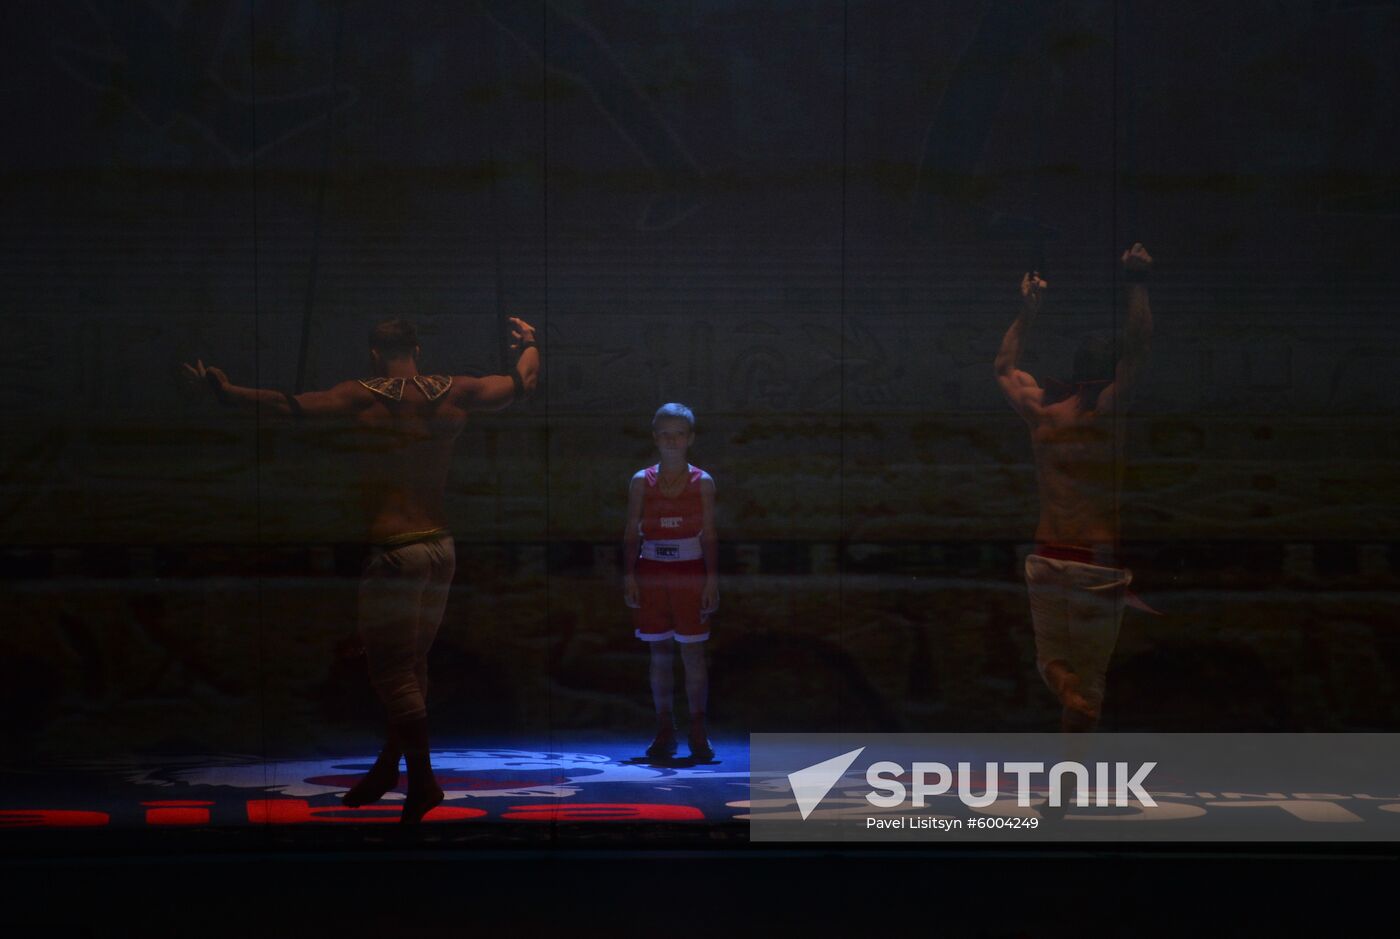 Russia Boxing Worlds Opening Ceremony